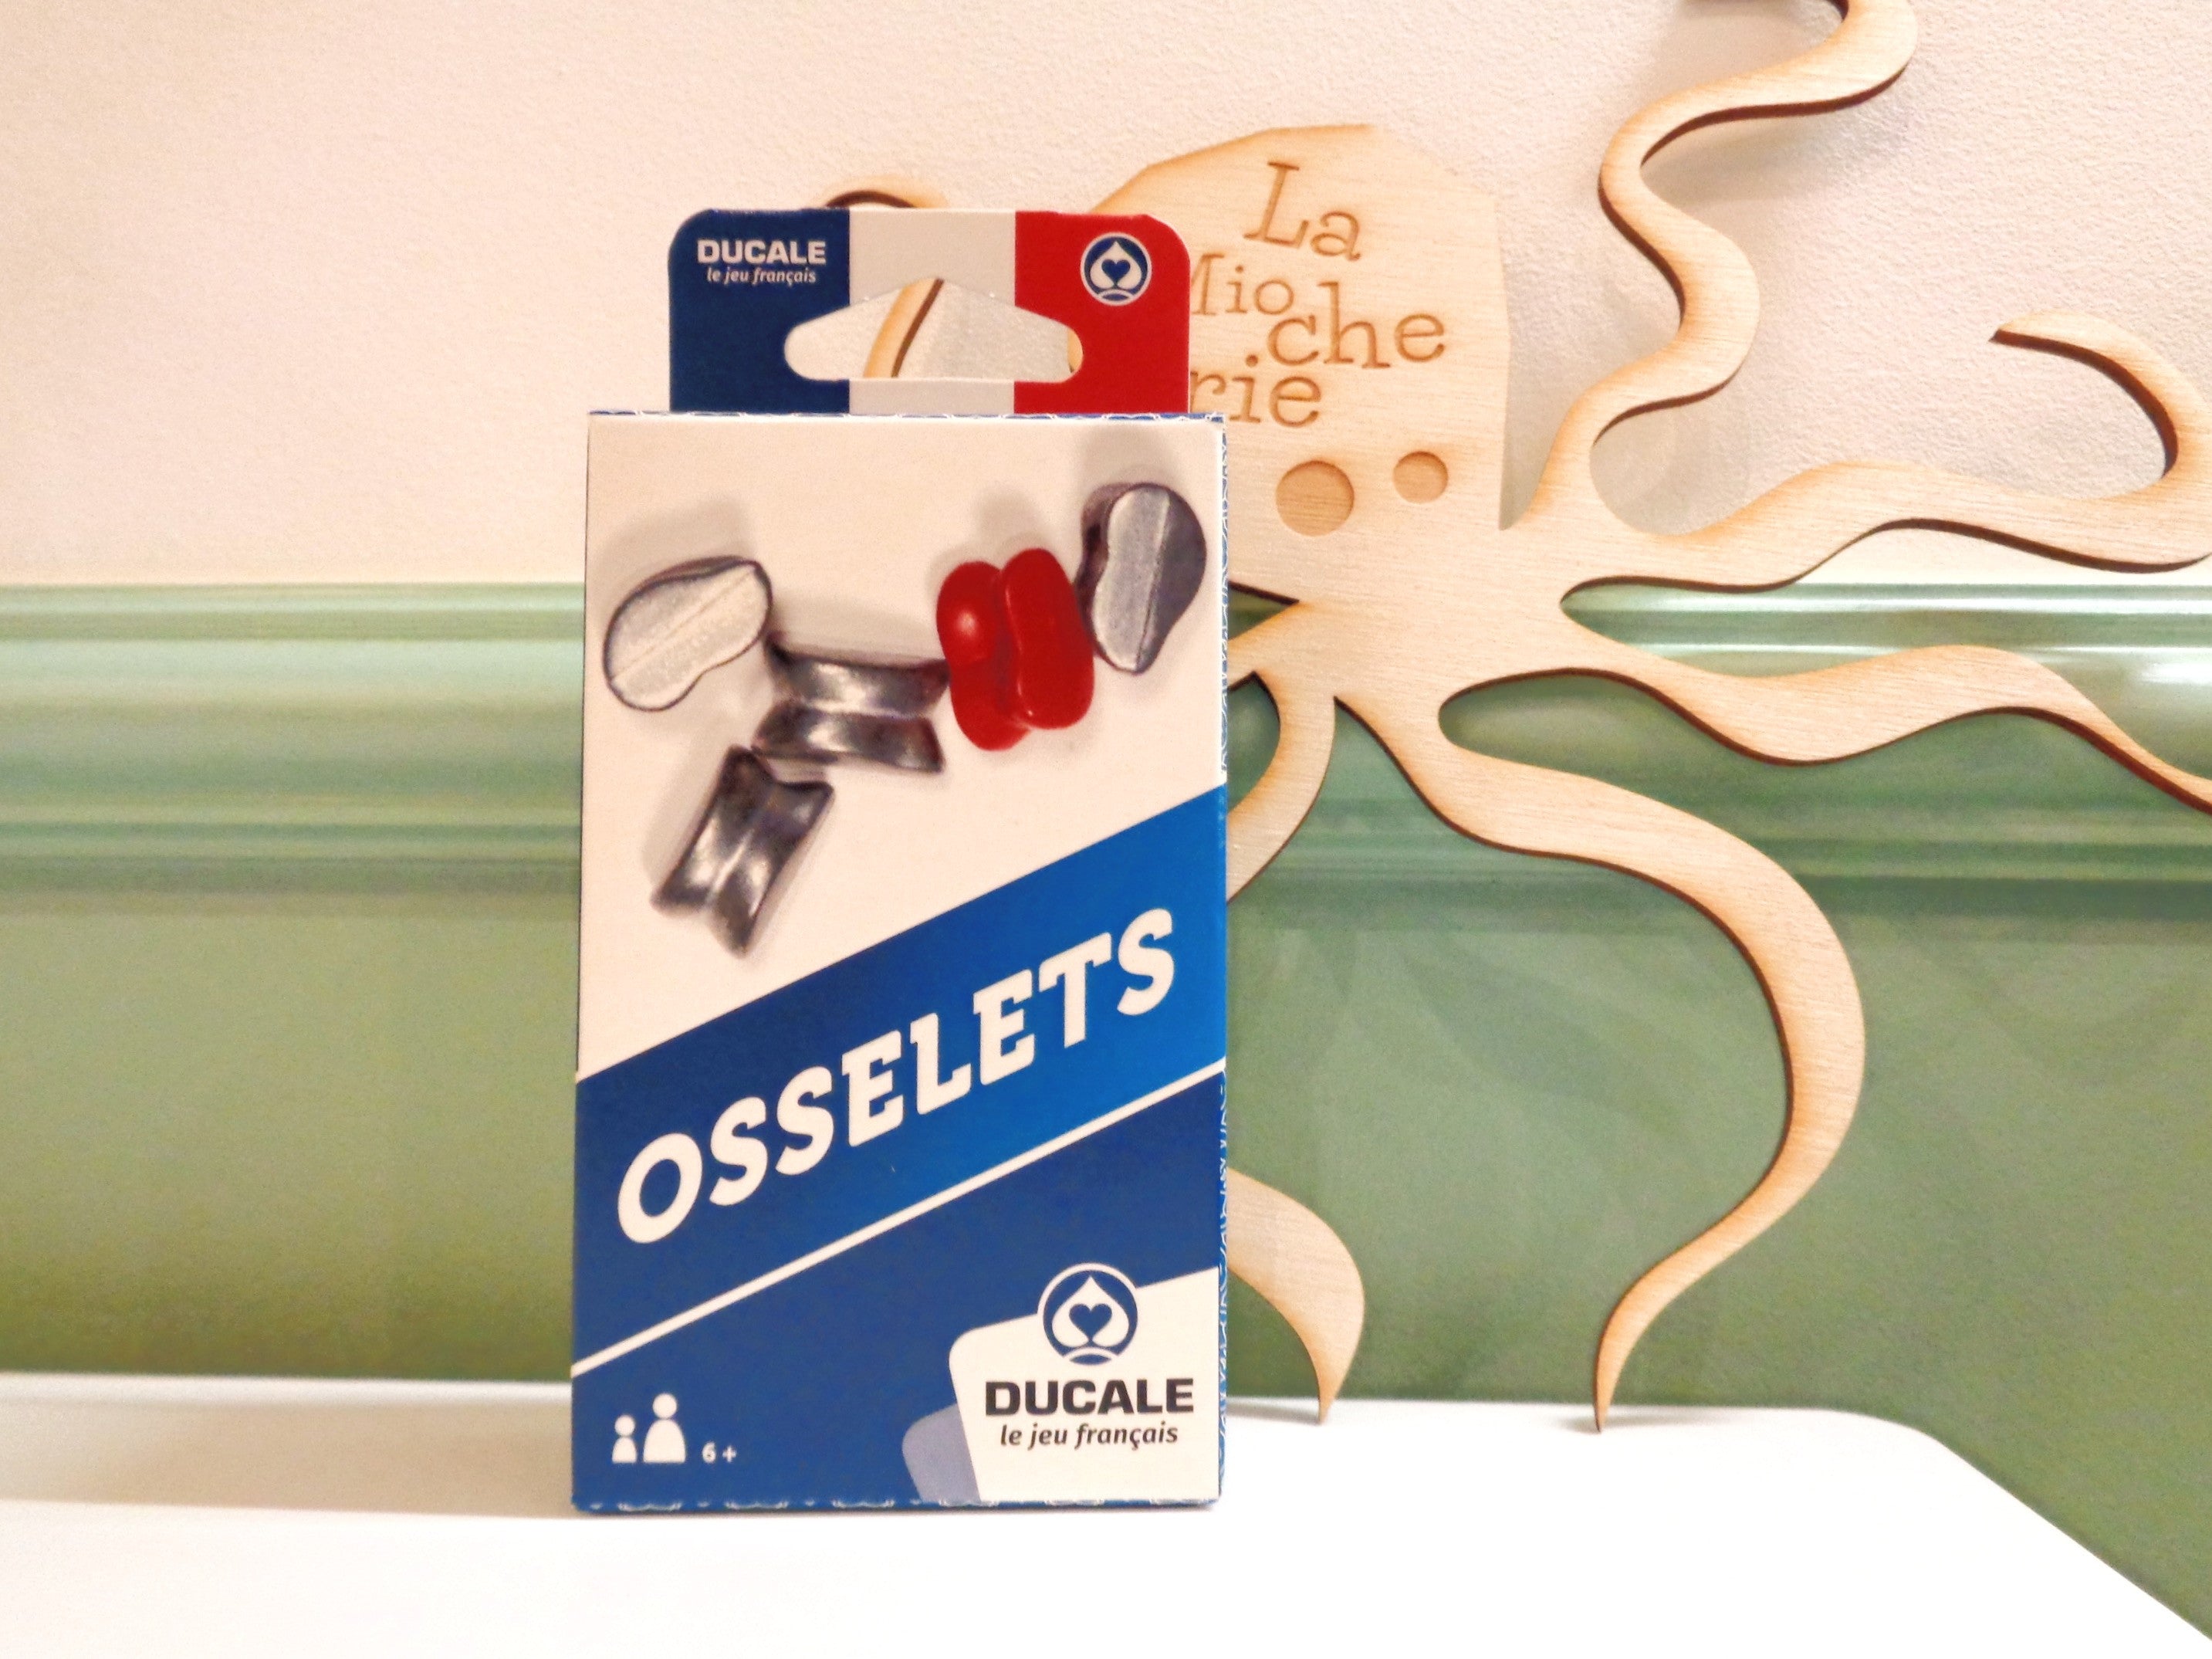 Les Osselets Made in France - Ducale